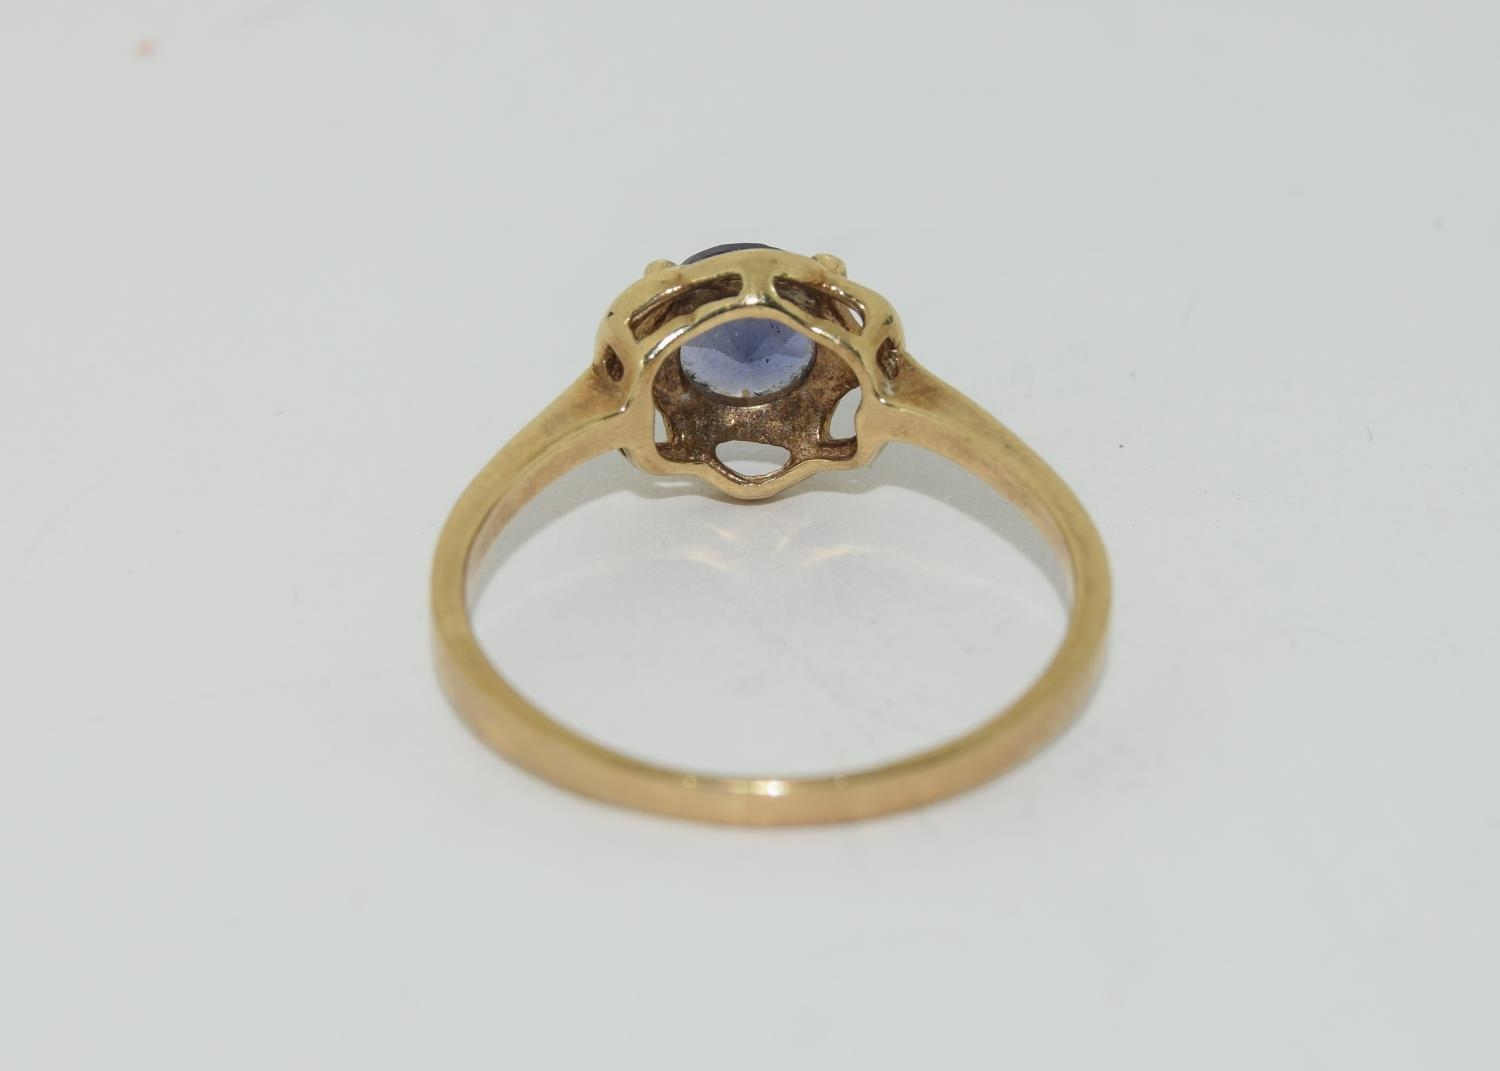 9ct gold ladies amethyst ring size P - Image 3 of 5